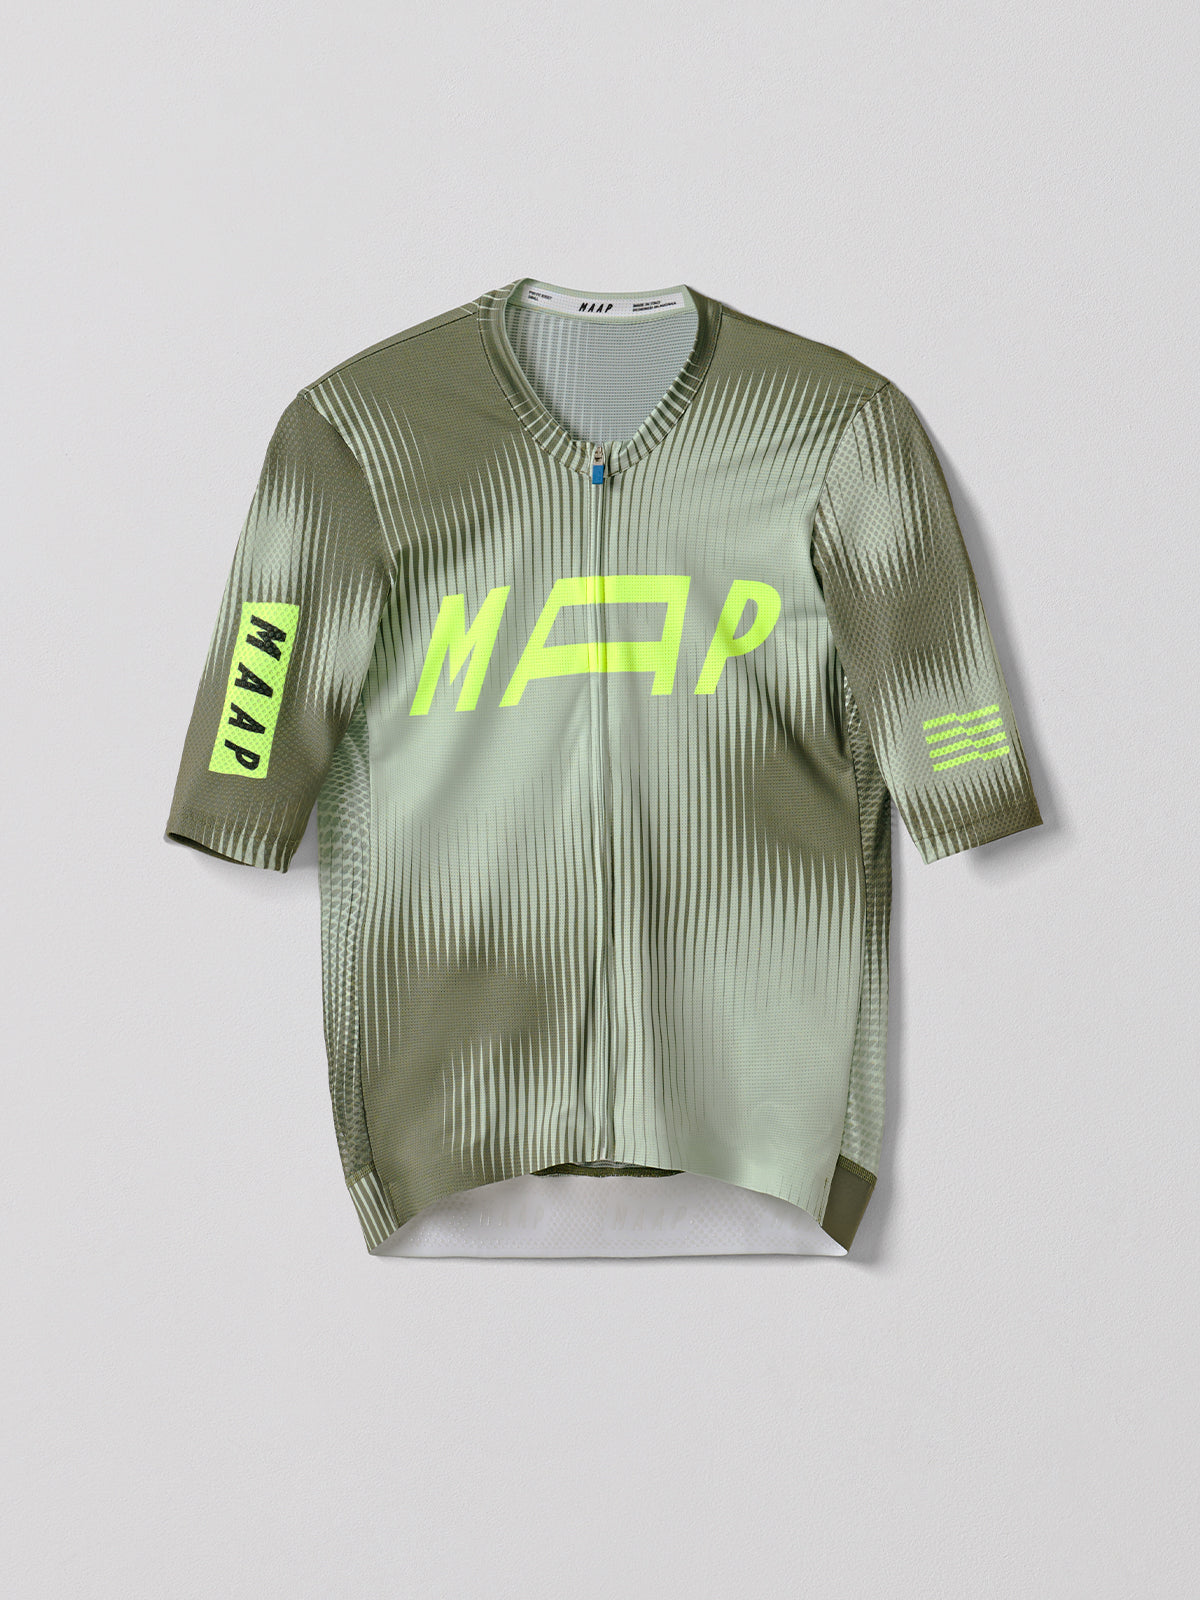 Privateer I.S Pro Jersey